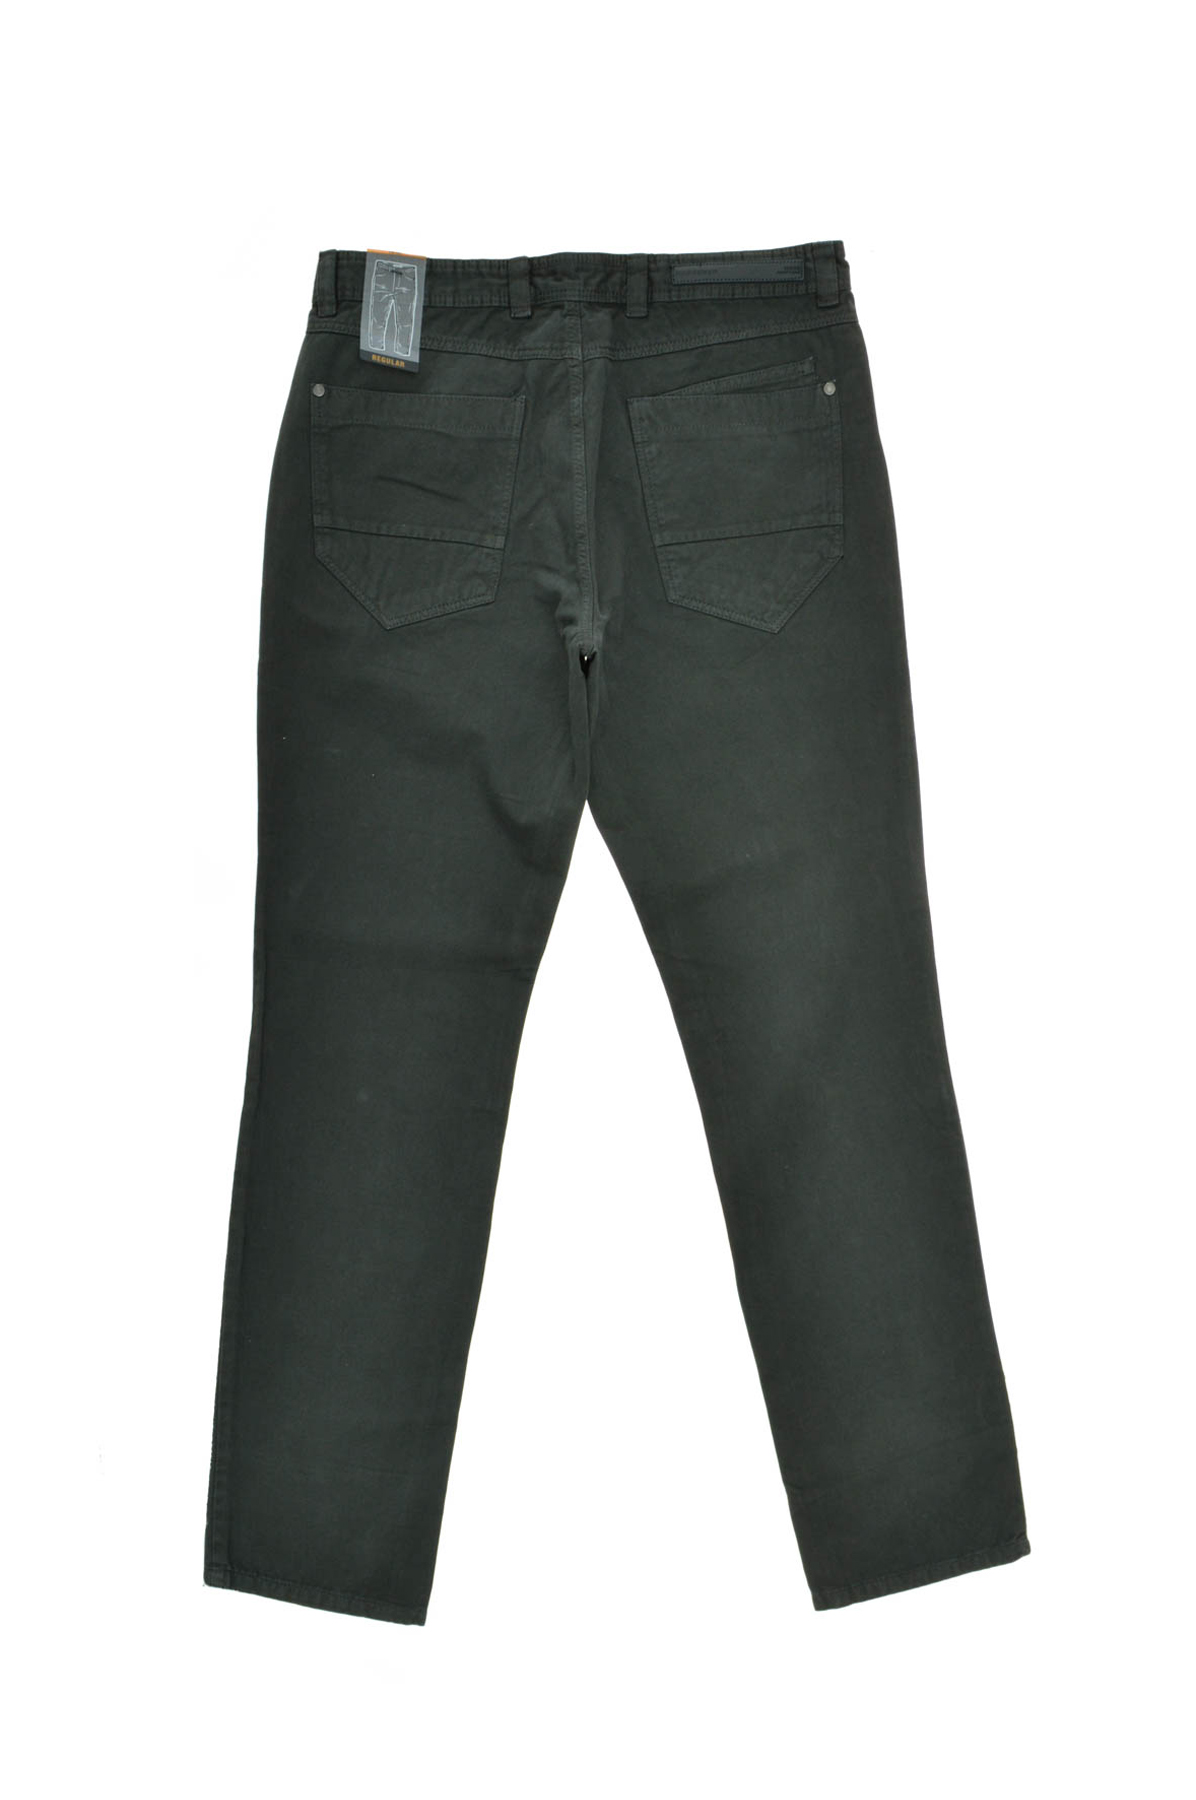 Men's trousers - RESERVED - 1